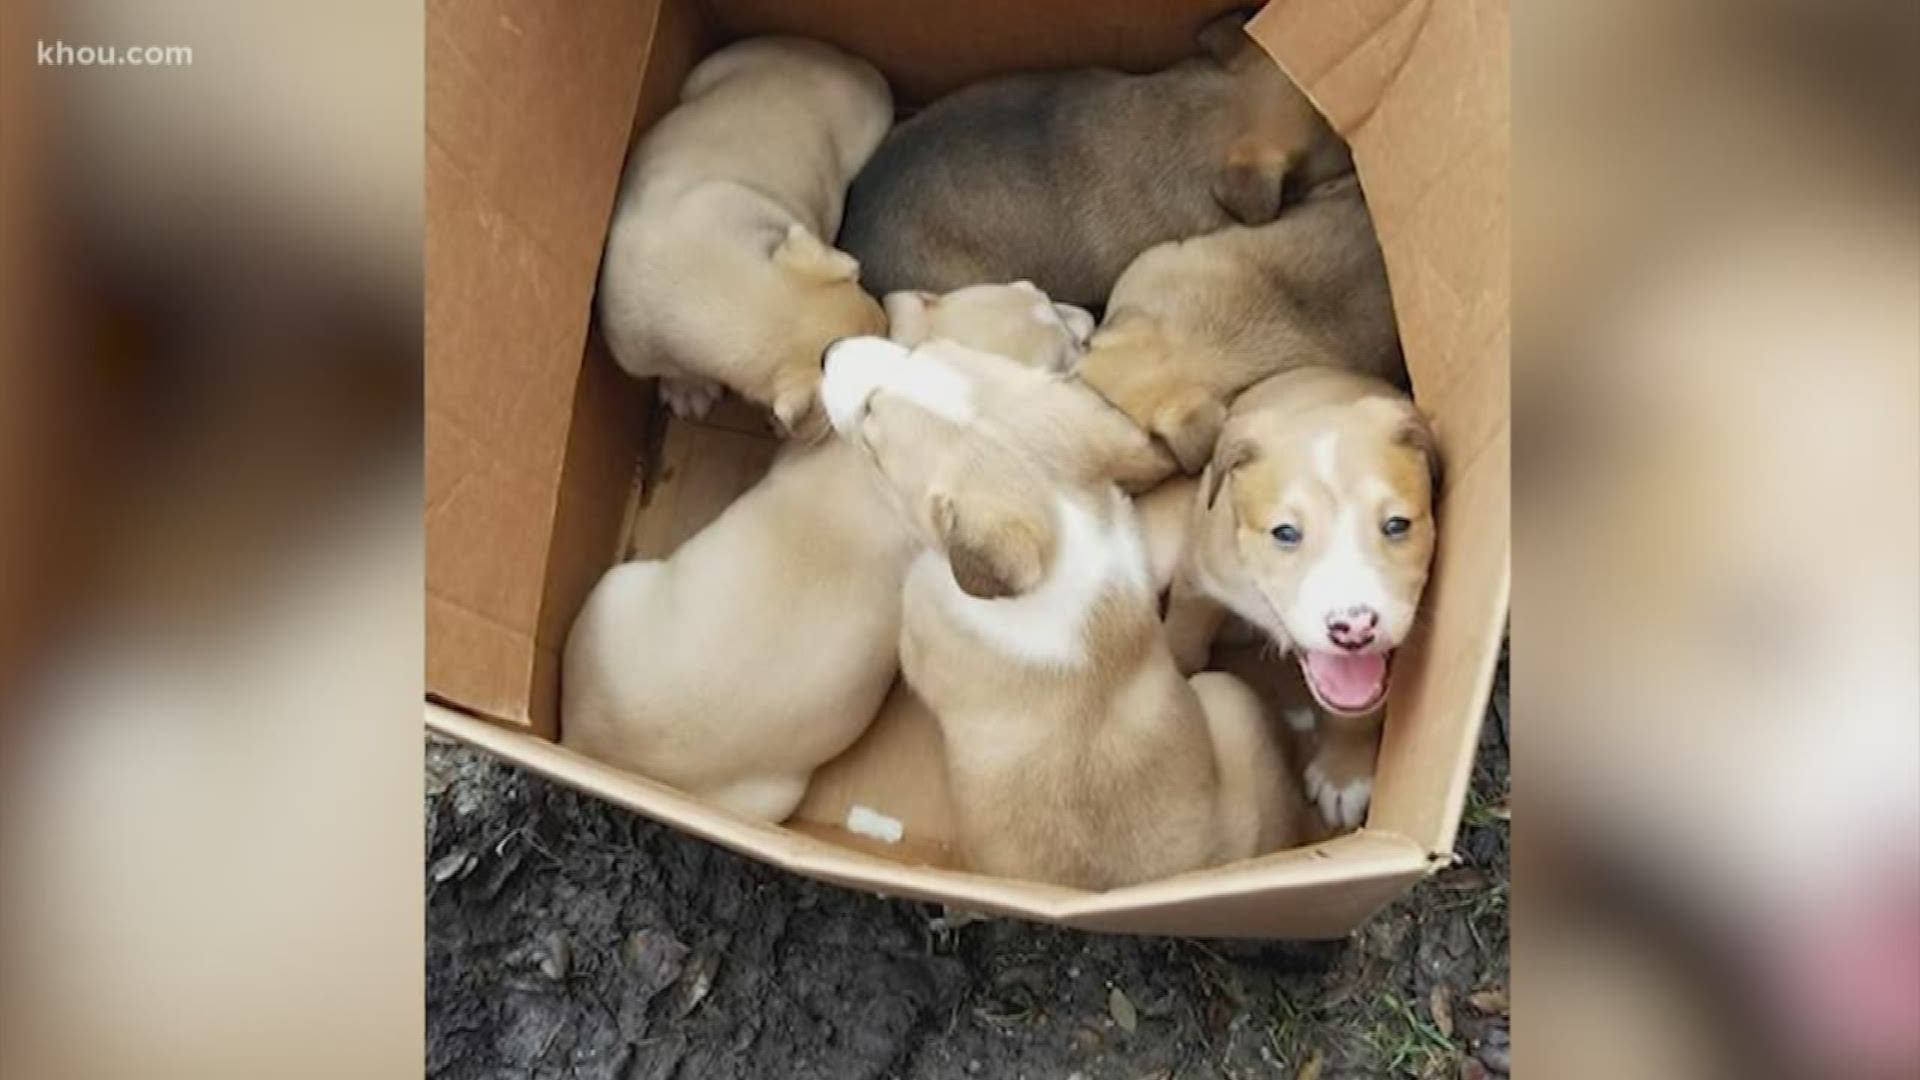 Some abandoned puppies in Pearland are getting a lot of attention on Facebook and it's turning into a teachable moment.